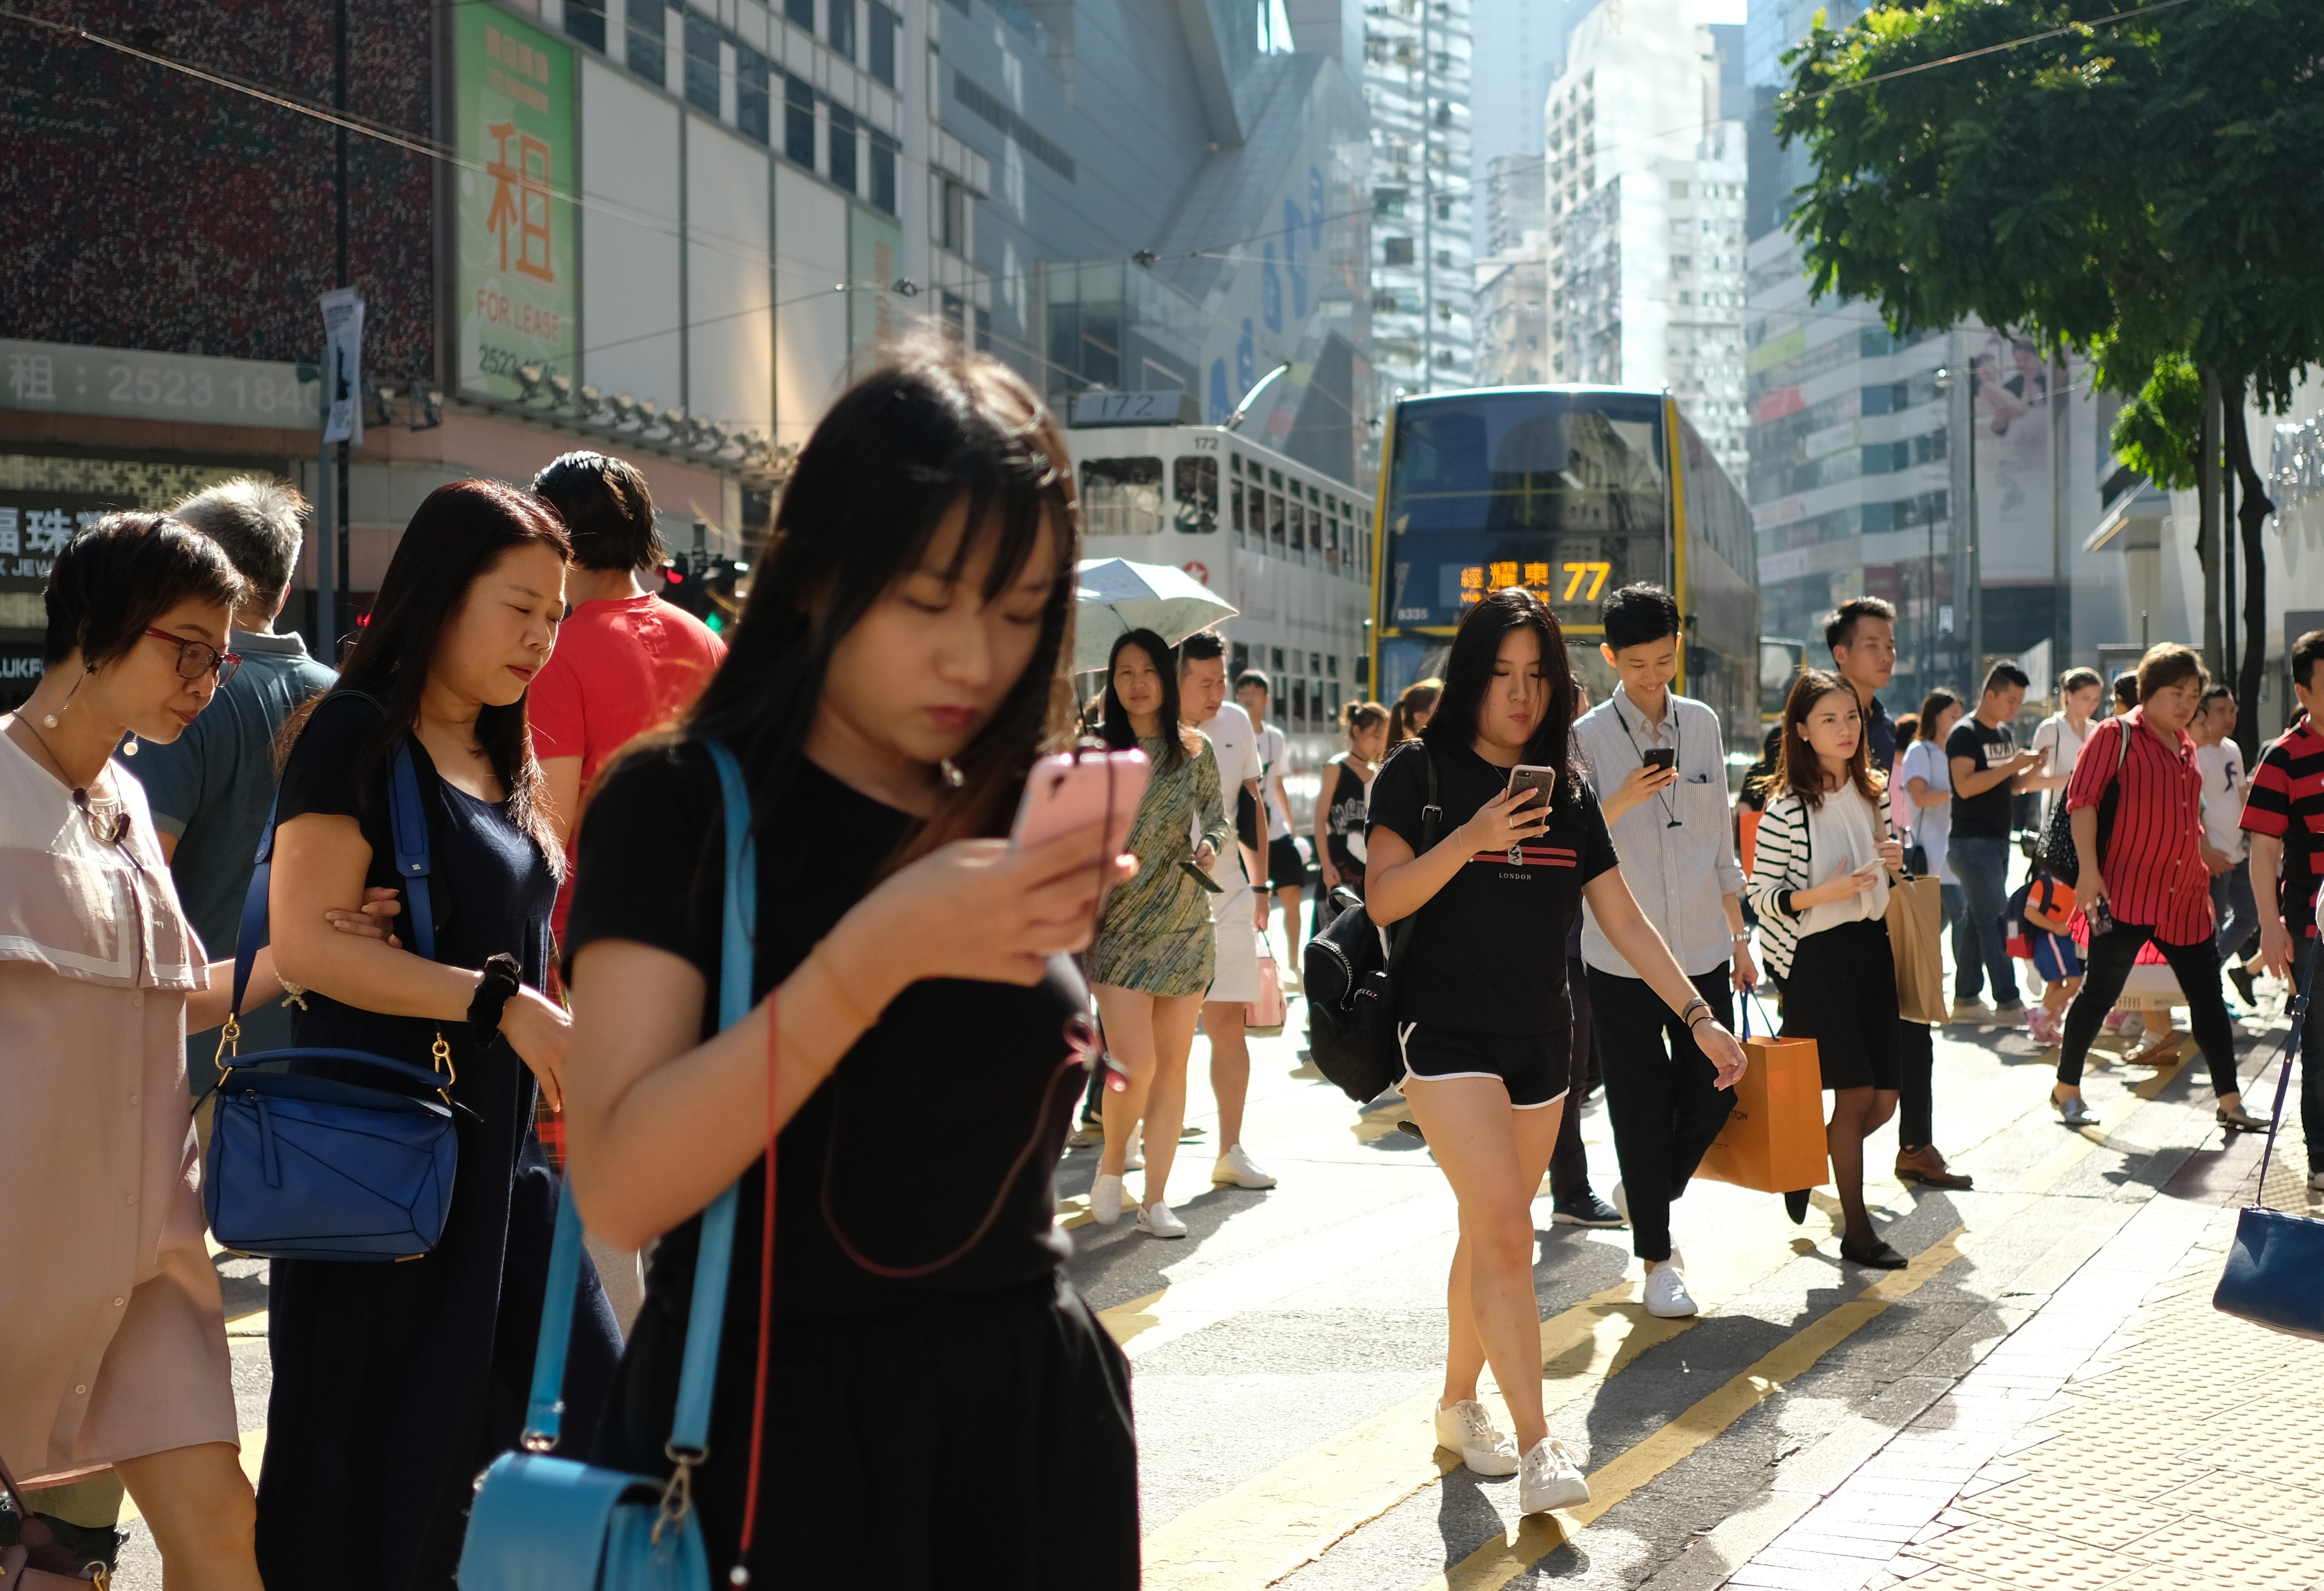 Pedestrians view their smartphones as they walk cross an intersection in Hong Kong’s Causeway Bay shopping district. Photo: Fung Chang